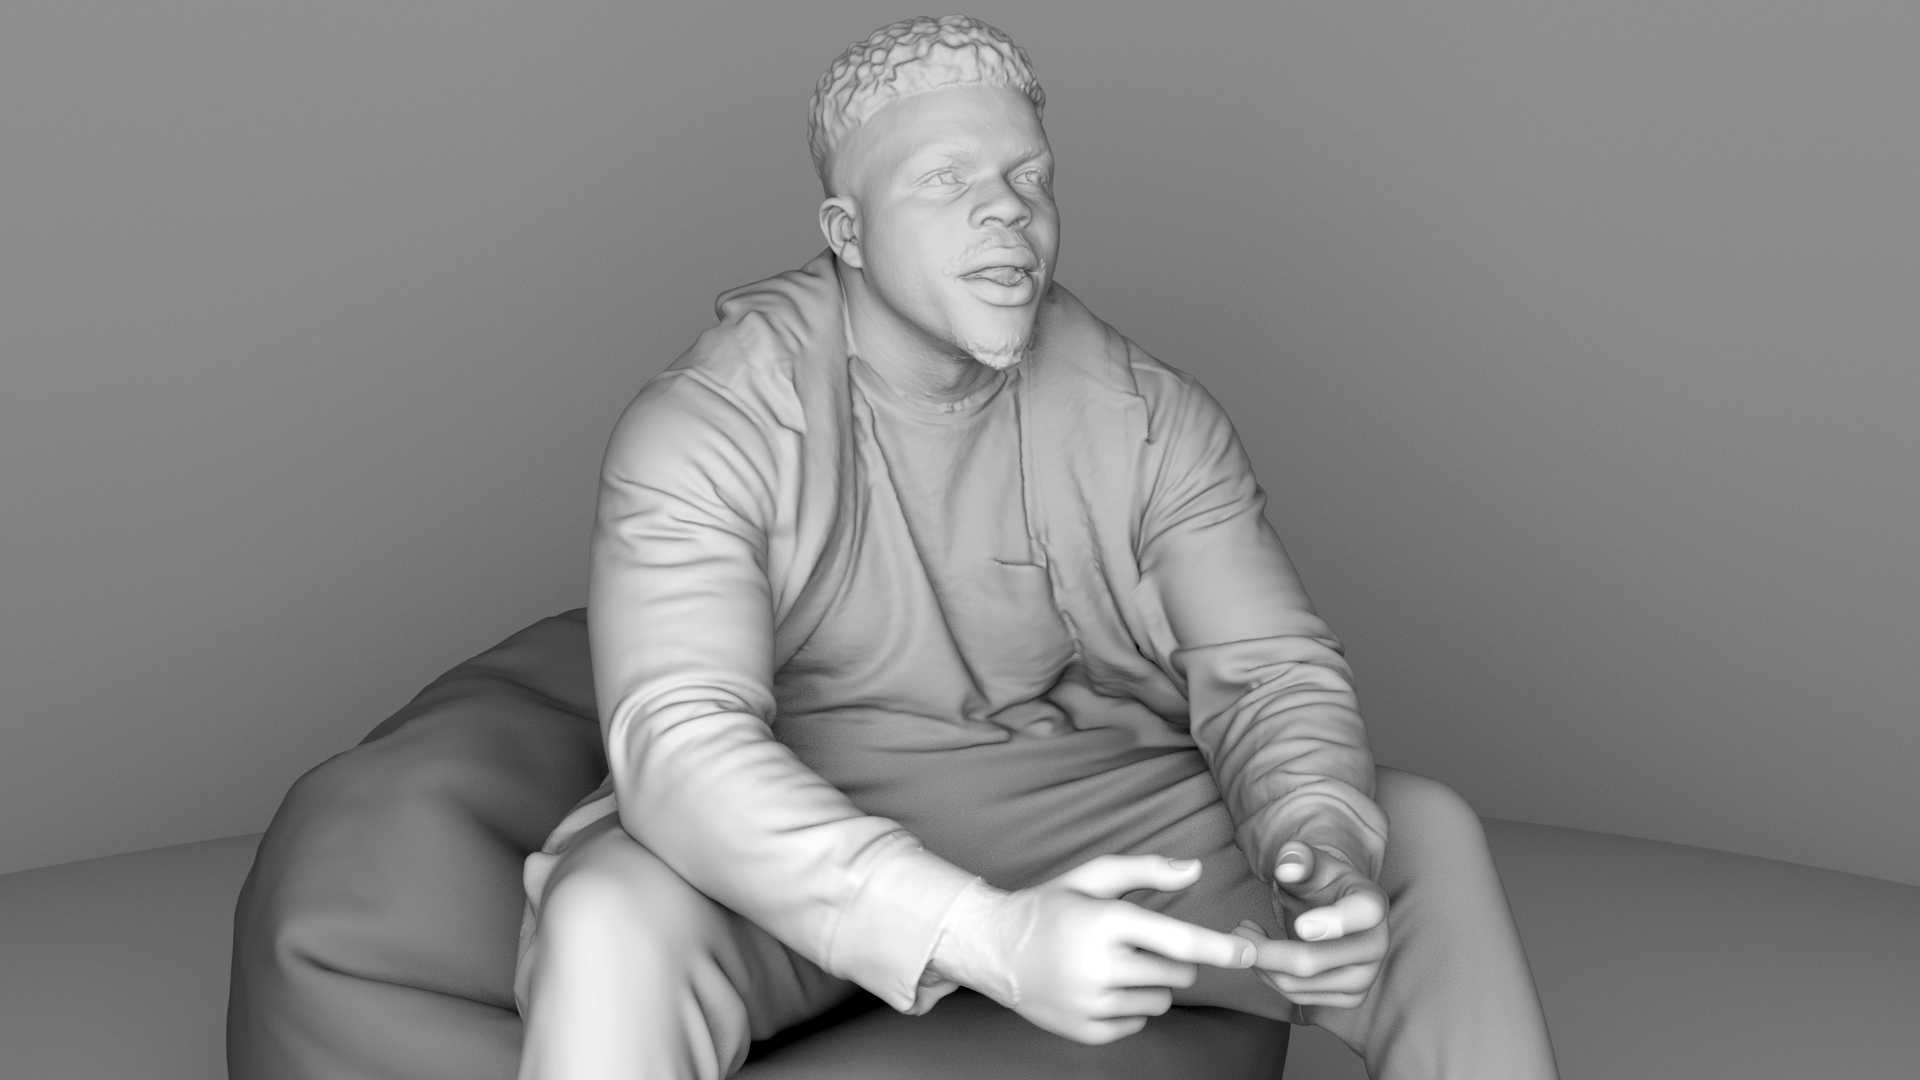 Creative Poses. Full body 3D Scan of a gamer. 3D Scanned by Repronauts, London, UK.